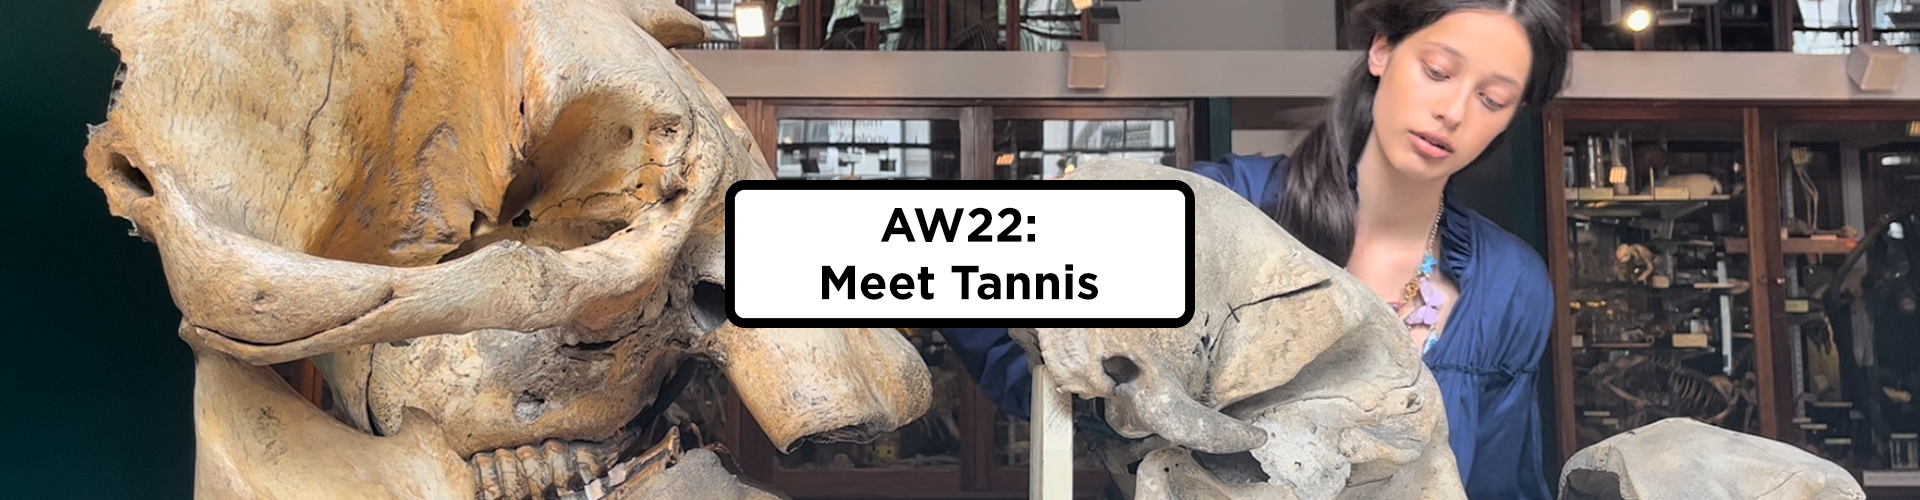 AW22: Meet Tannis from the Grant Museum of Zoology